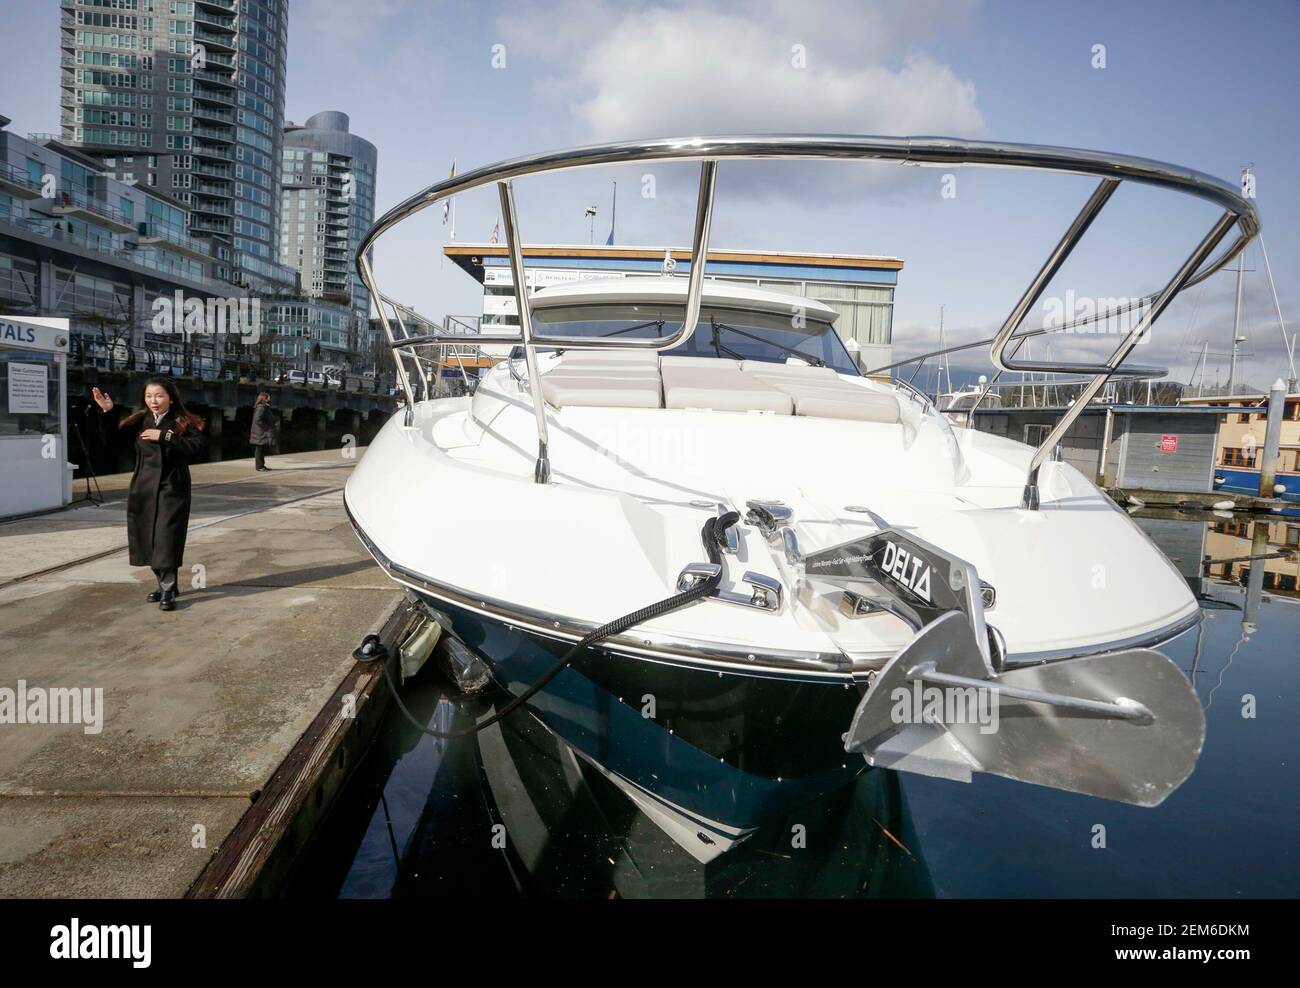 Vancouver, Canada. 24th Feb, 2021. A cruiser boat for display during the 2021 Vancouver International Boat Show is seen at a harbour in Vancouver, British Columbia, Canada, Feb. 24, 2021. The Vancouver International Boat Show which goes virtual this year due to the COVID-19 pandemic, kicked off on Wednesday, showcasing hundreds of new boats, products and accessories online. Credit: Liang Sen/Xinhua/Alamy Live News Stock Photo